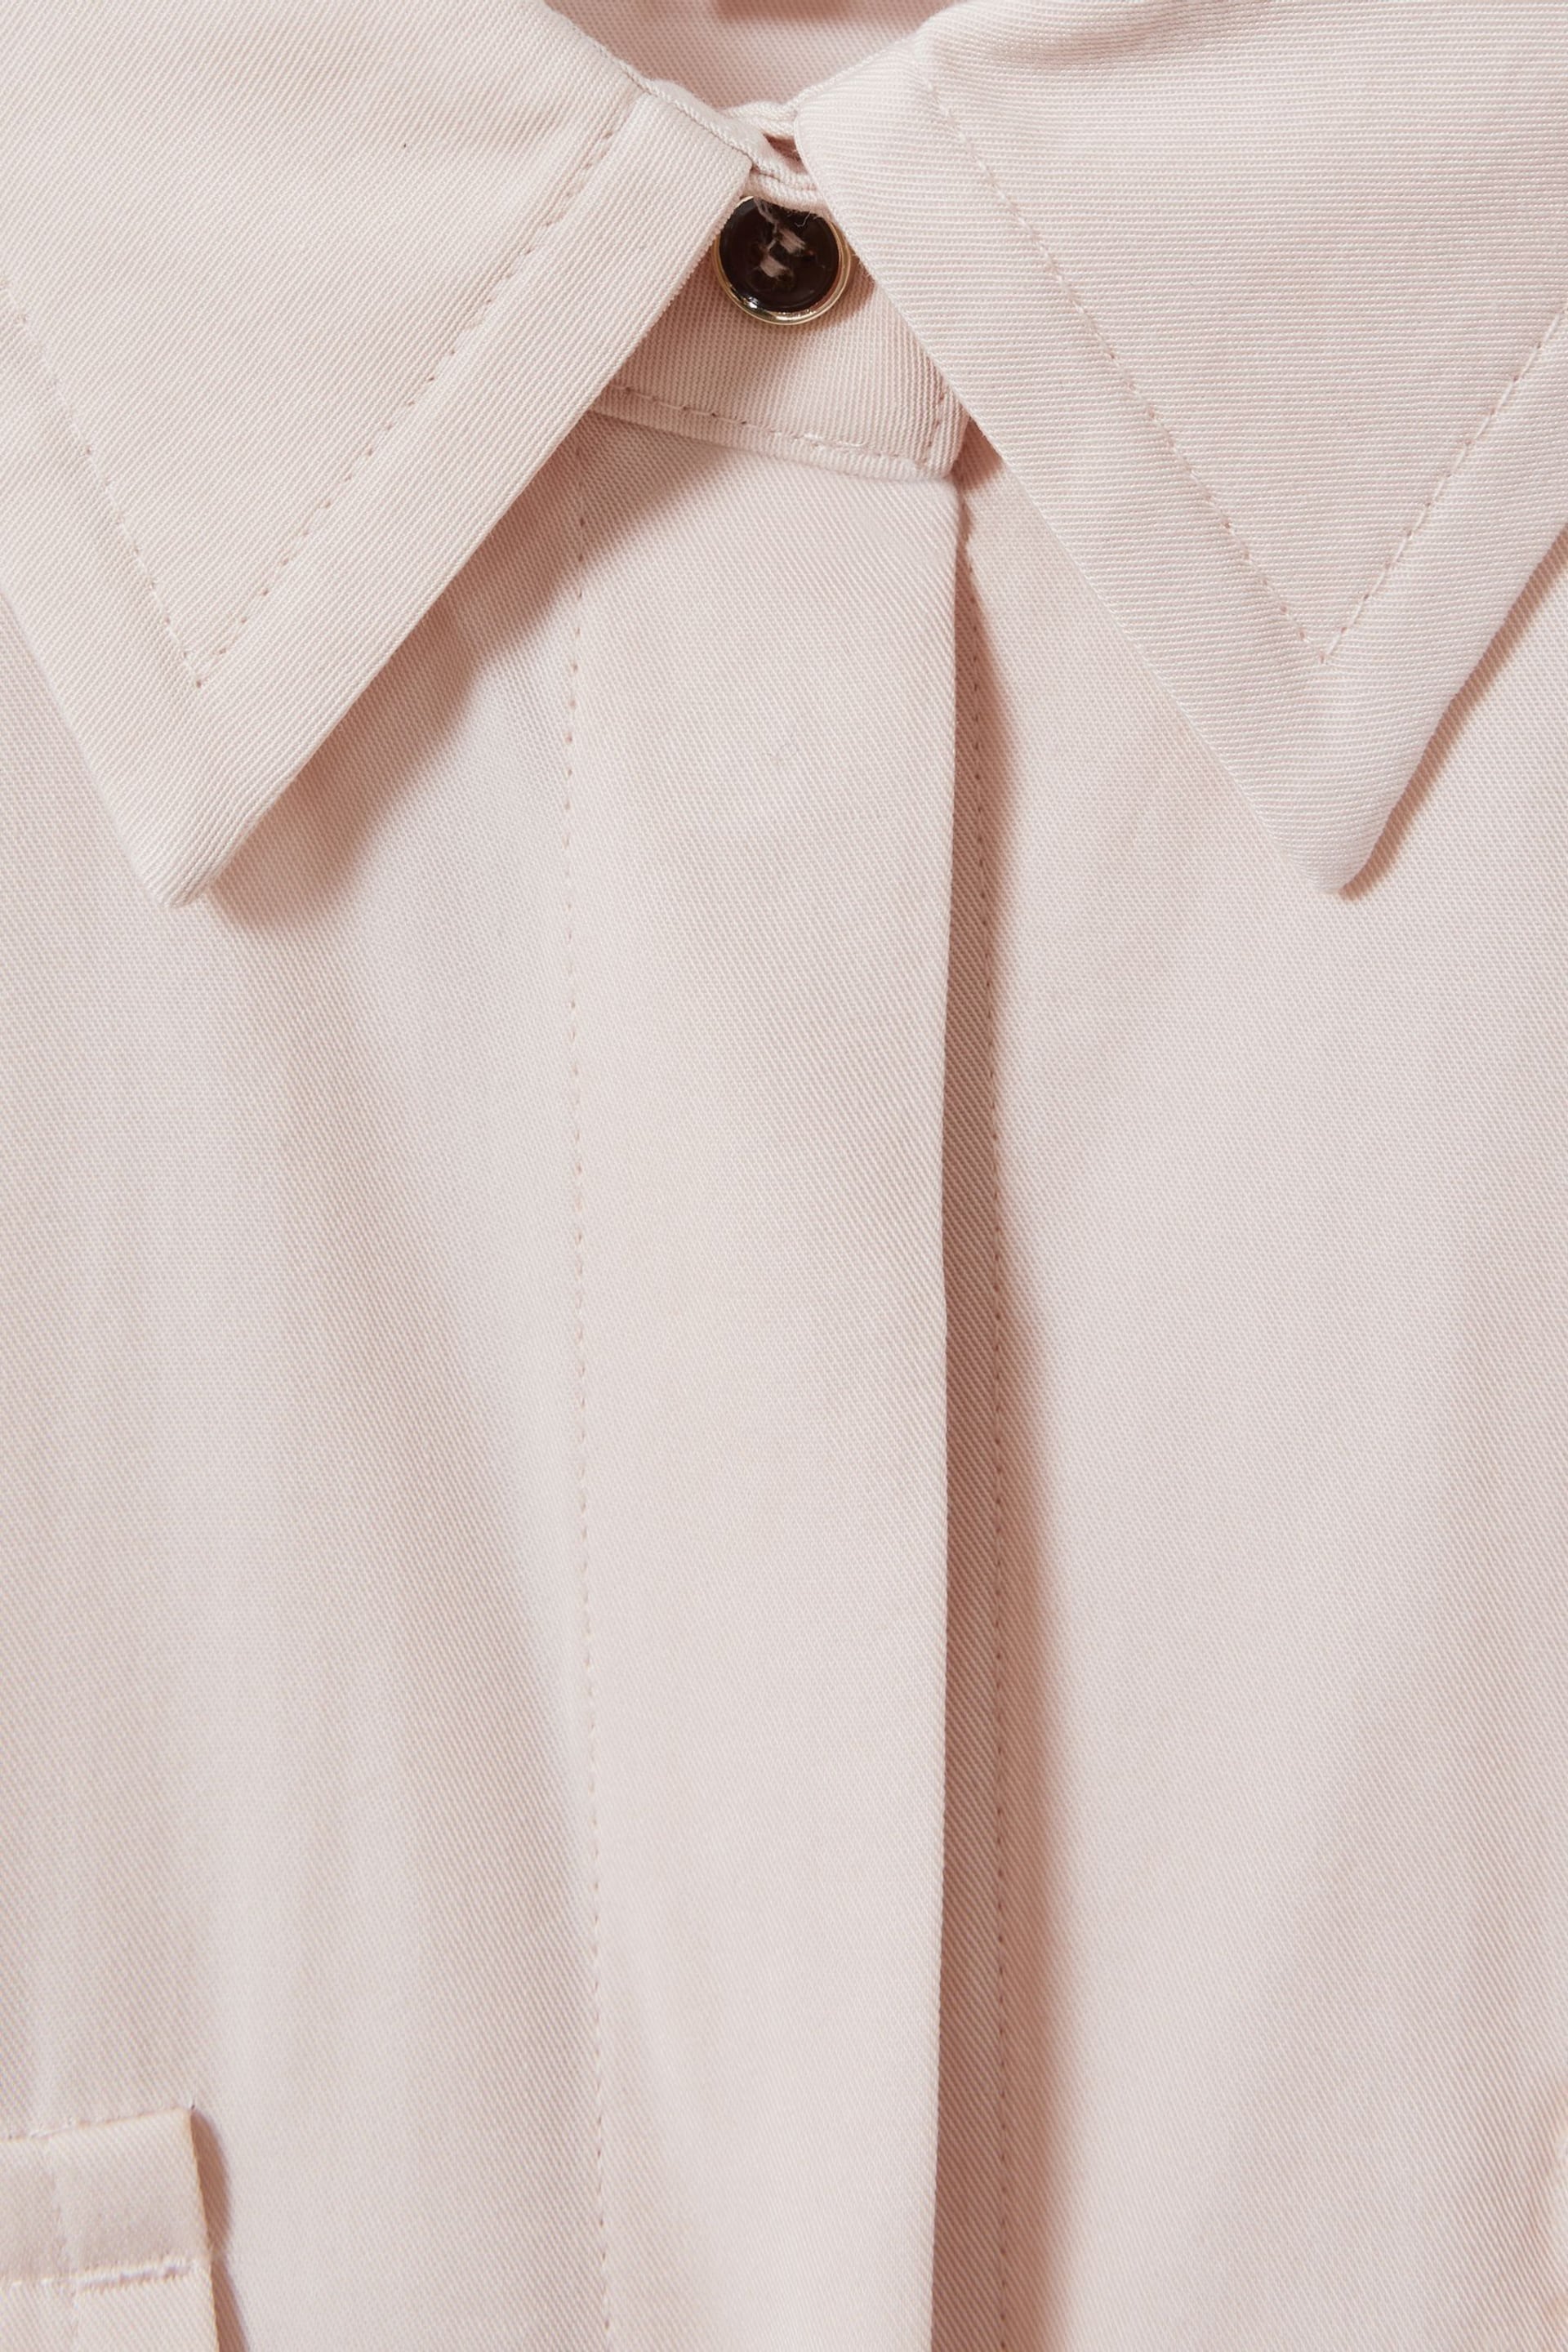 Reiss Nude Isador Lyocell Button Through Shirt - Image 5 of 5